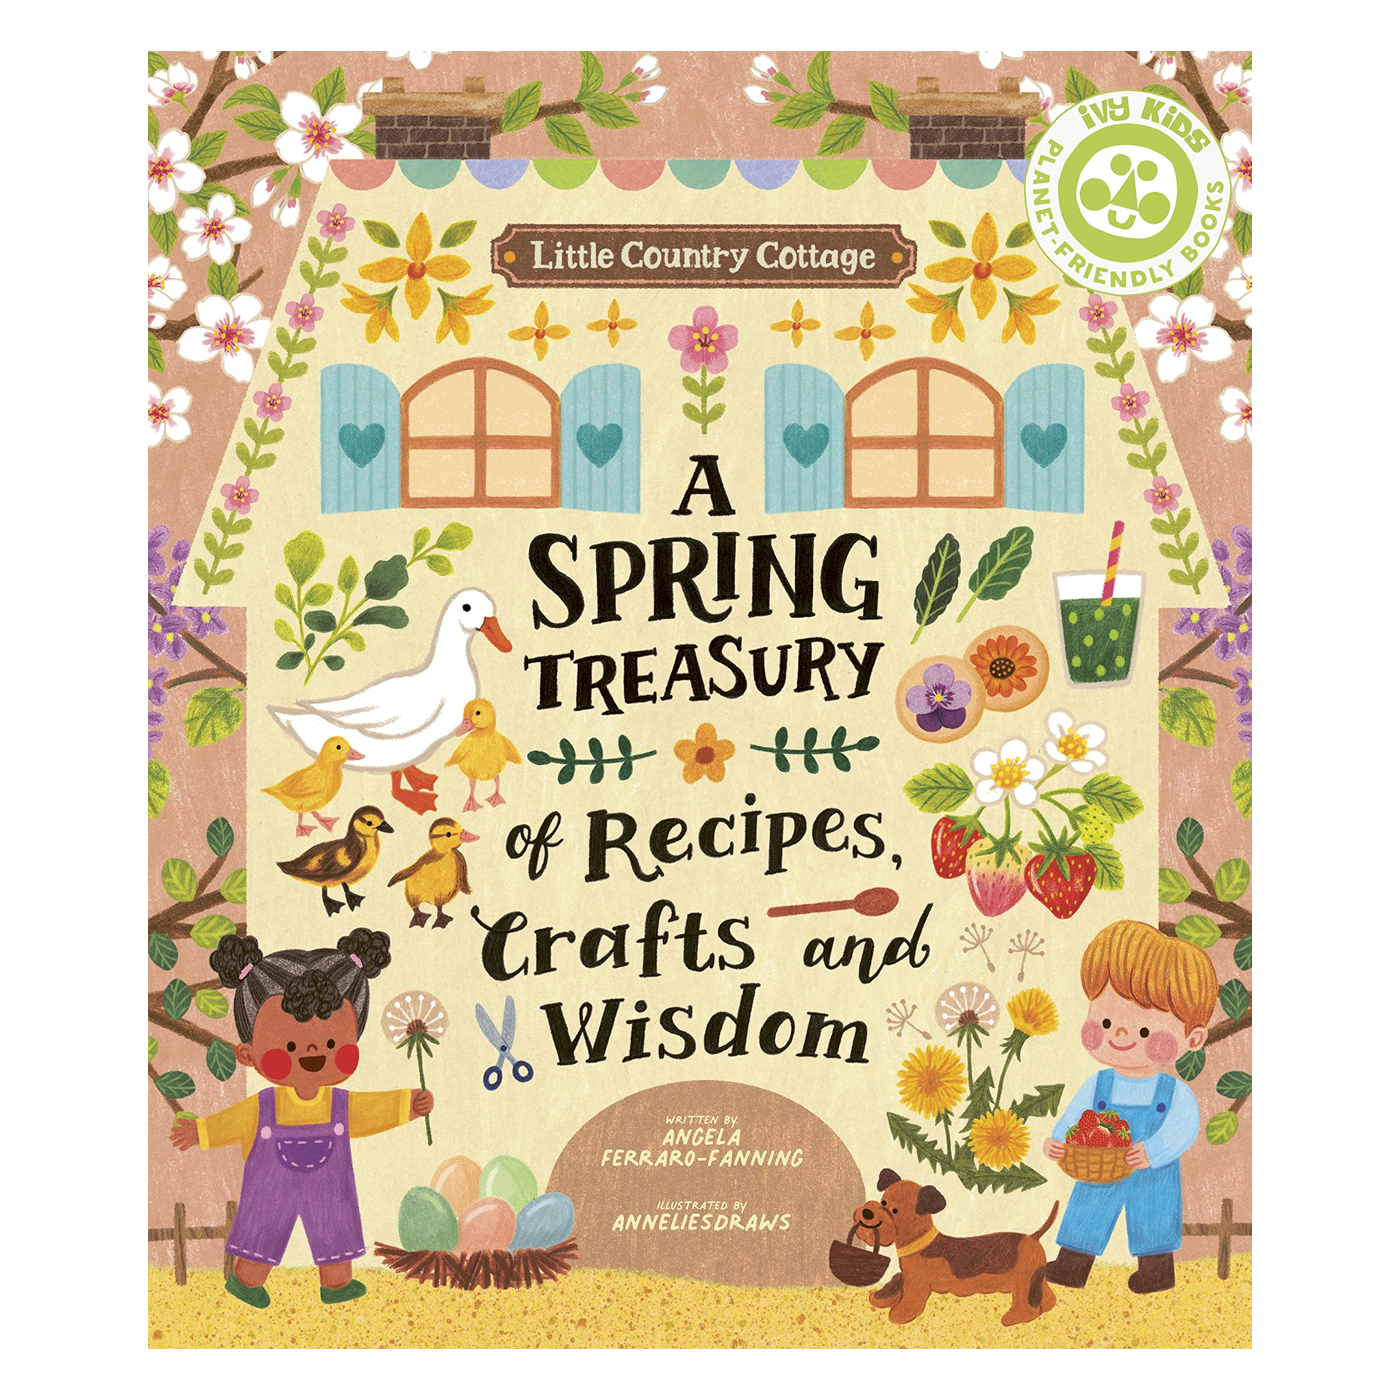  Little Country Cottage: A Spring Treasury of Recipes, Crafts and Wisdom